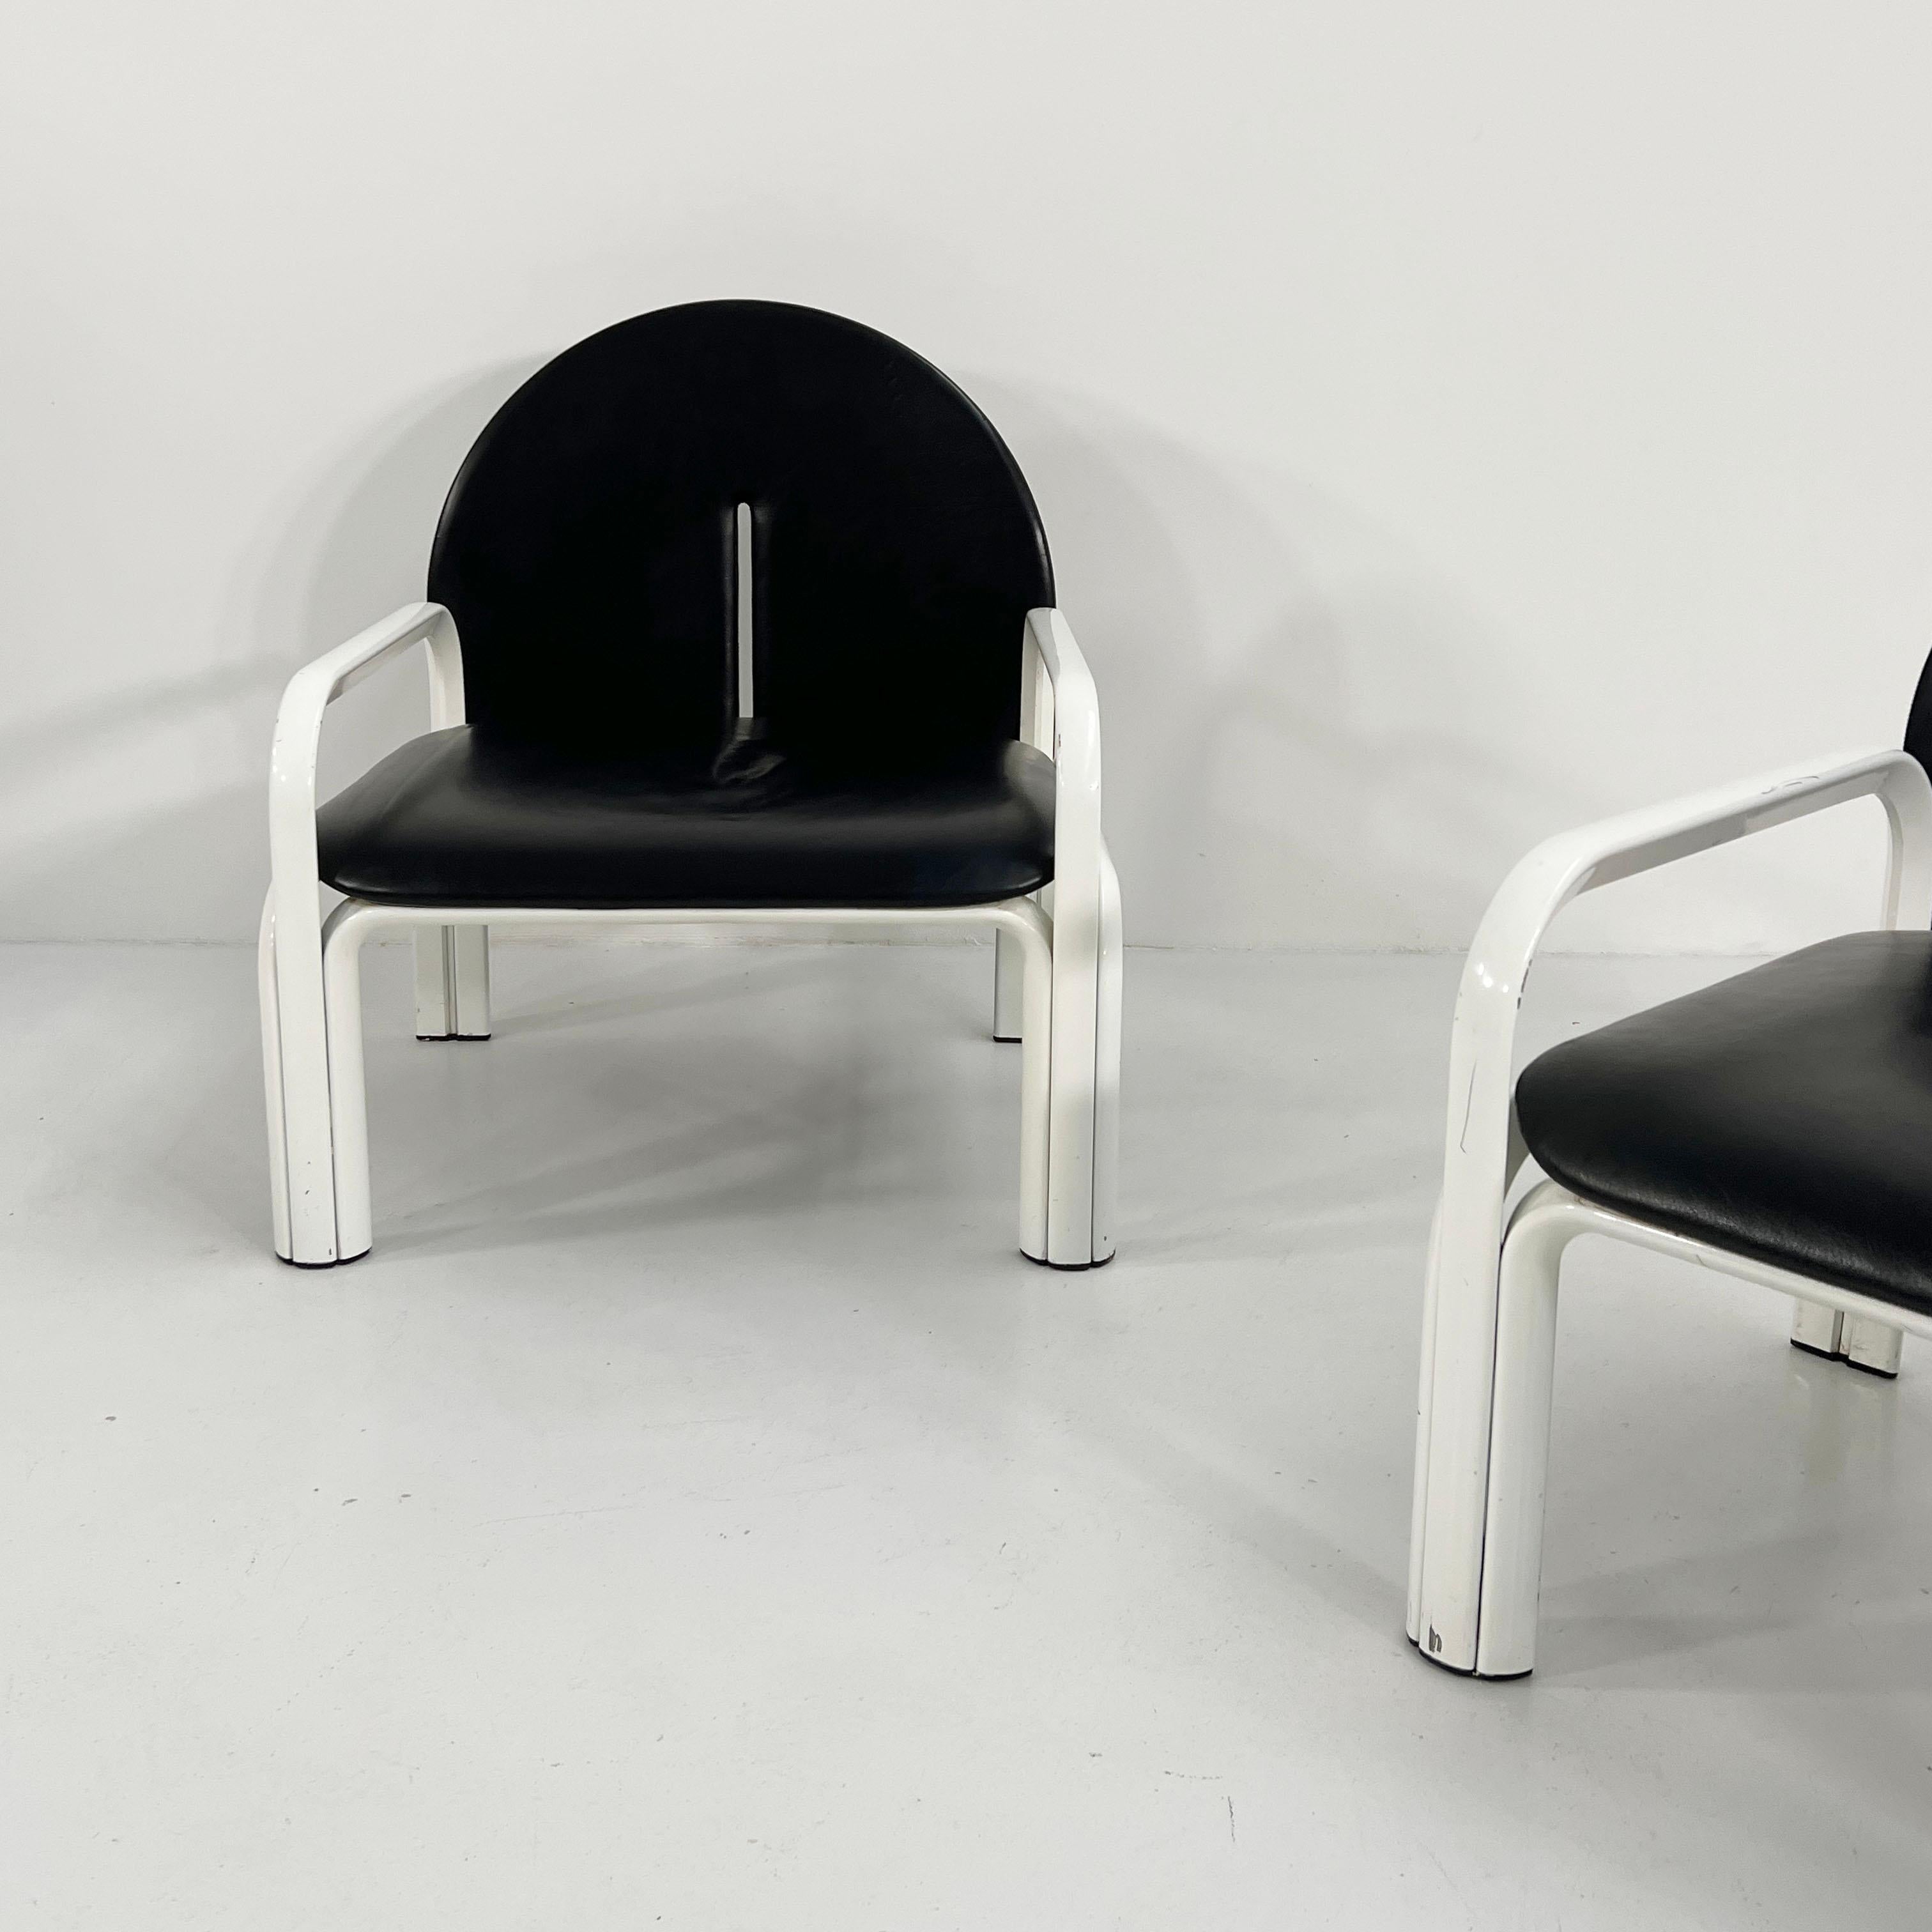 Pair of 54 L Armchairs by Gae Aulenti for Knoll International, 1970s For Sale 5